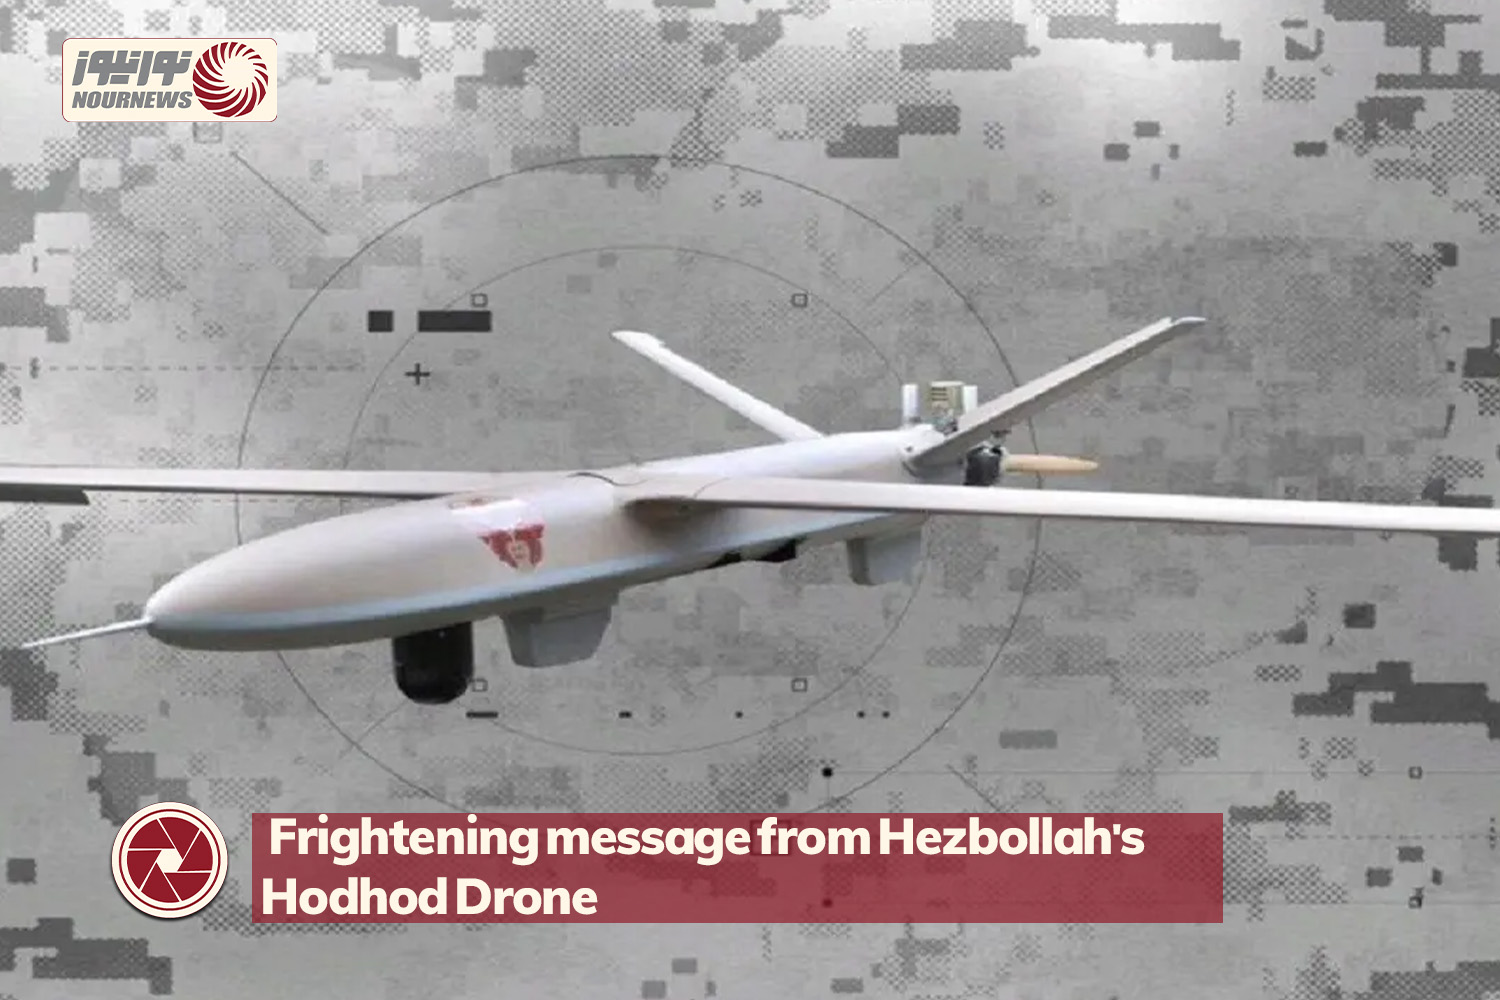 Frightening message from Hezbollah's Hodhod Drone